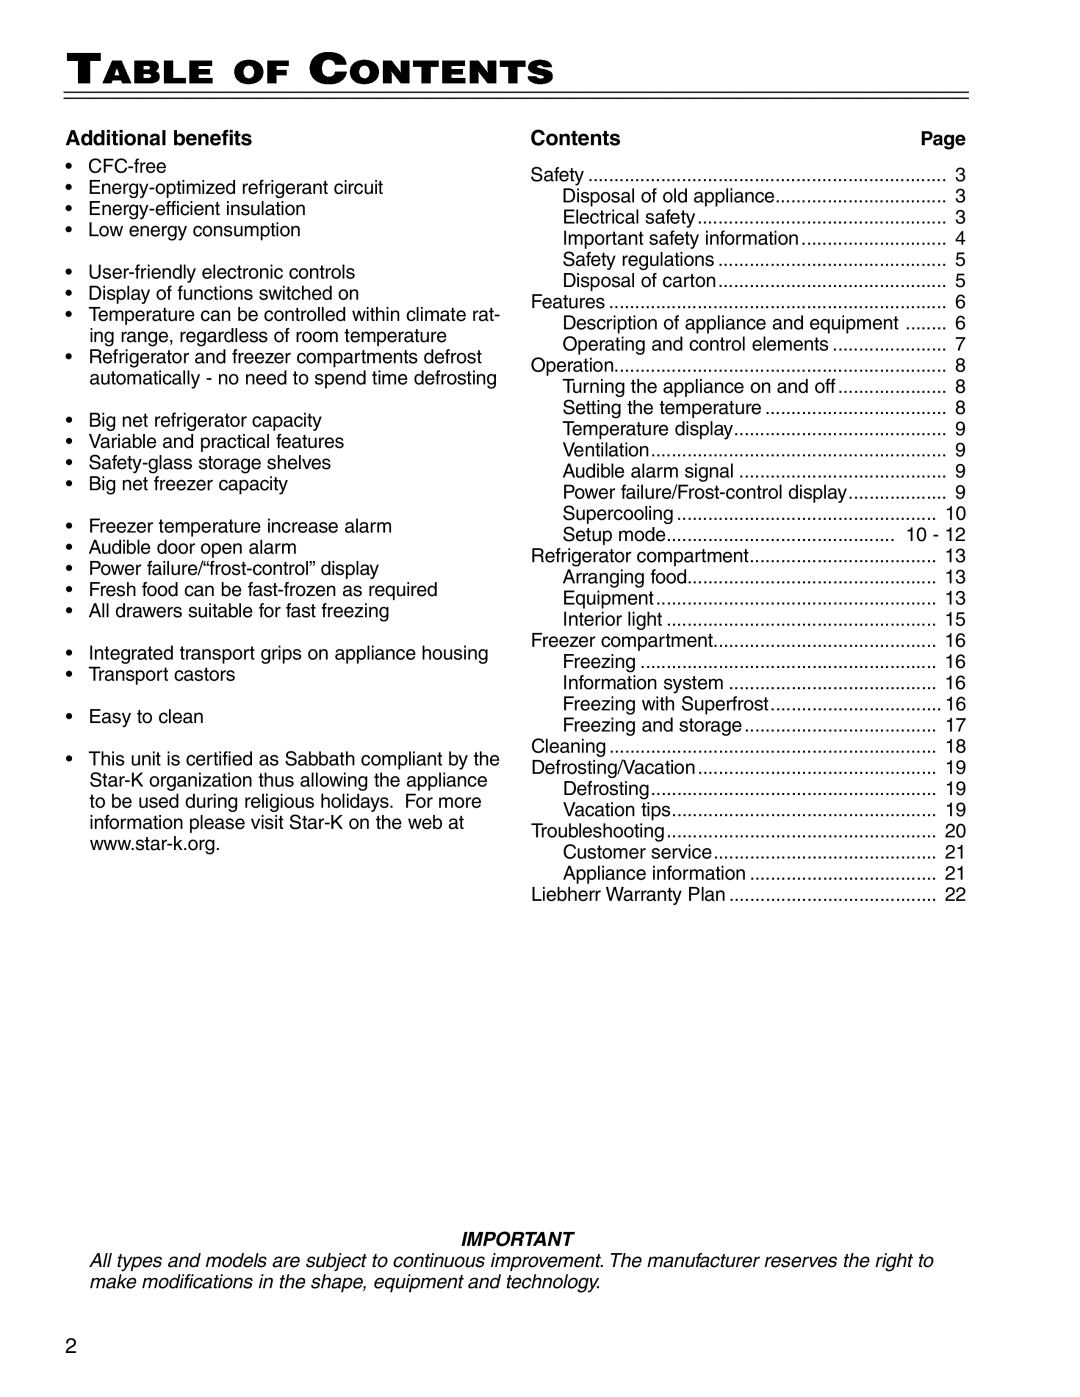 Liebherr CS 1400 7082 663-00 manual Table of Contents, Additional benefits 